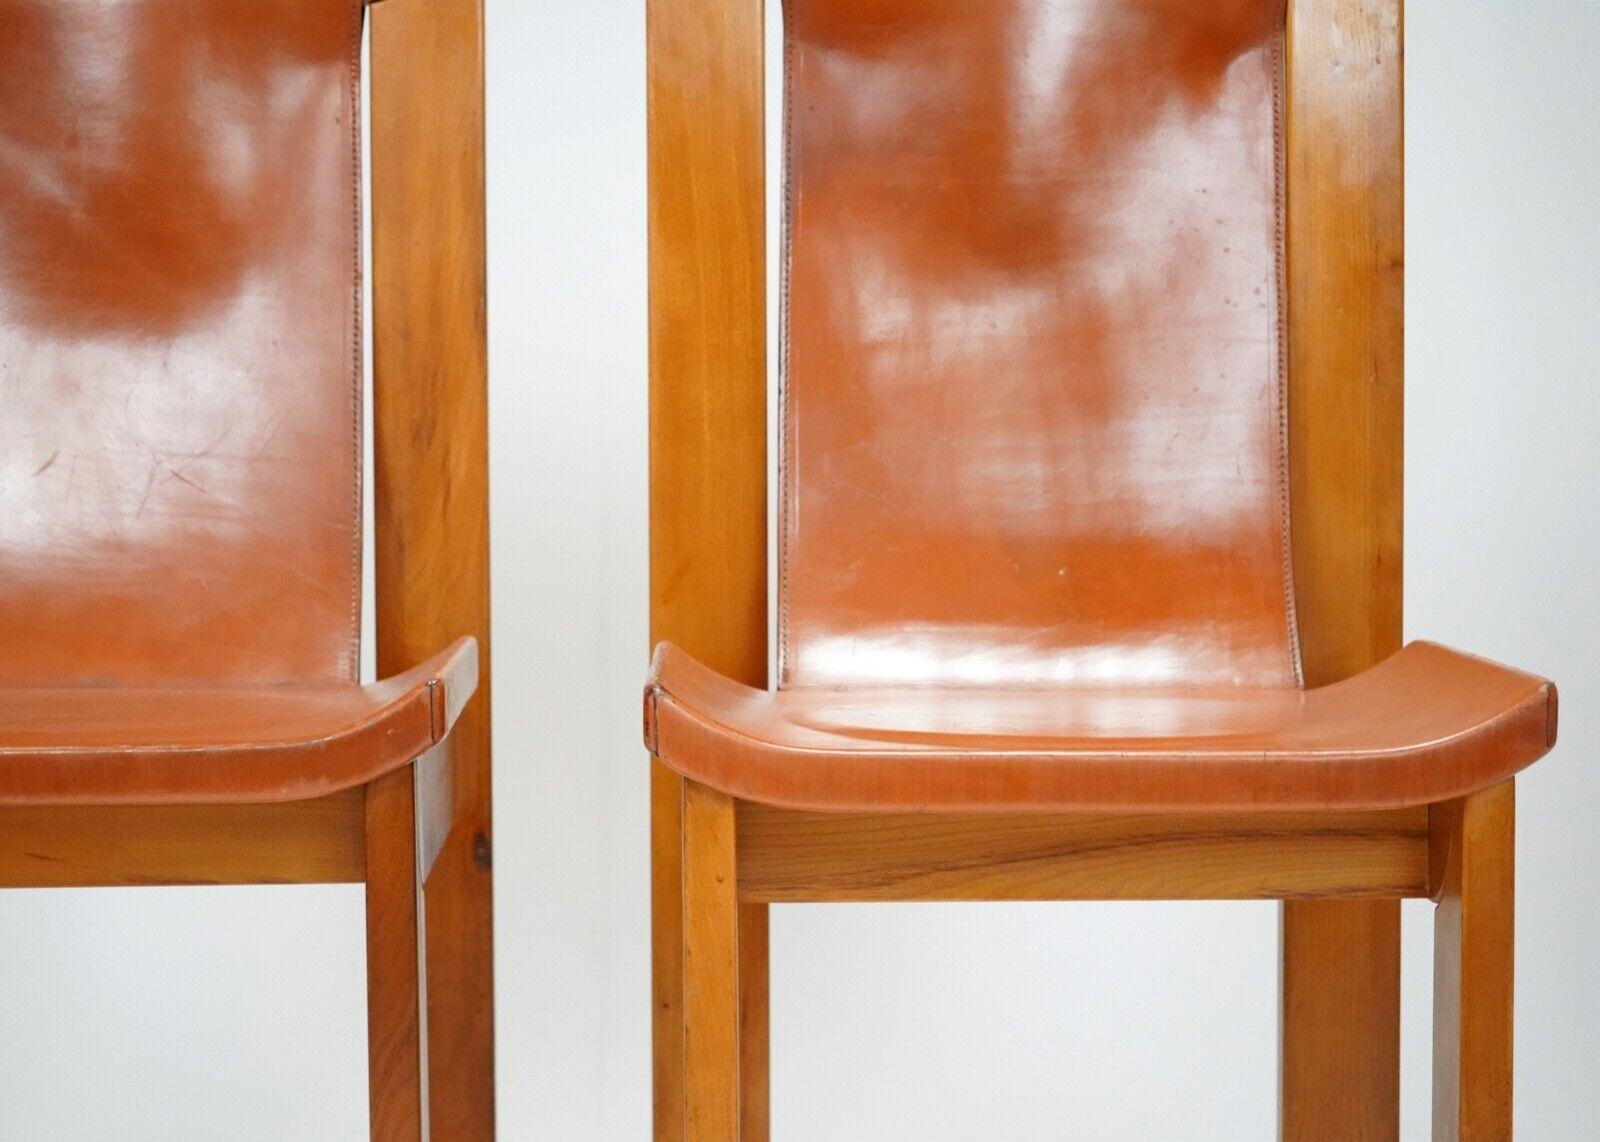 Set of four solid elm chairs with sling back cognac leather seats designed by Roland Hauesler for Maison Regain.
Made in France in the 1980s these Brutalist chairs are elegant, comfortable and superbly designed.
Sourced in France.
The condition